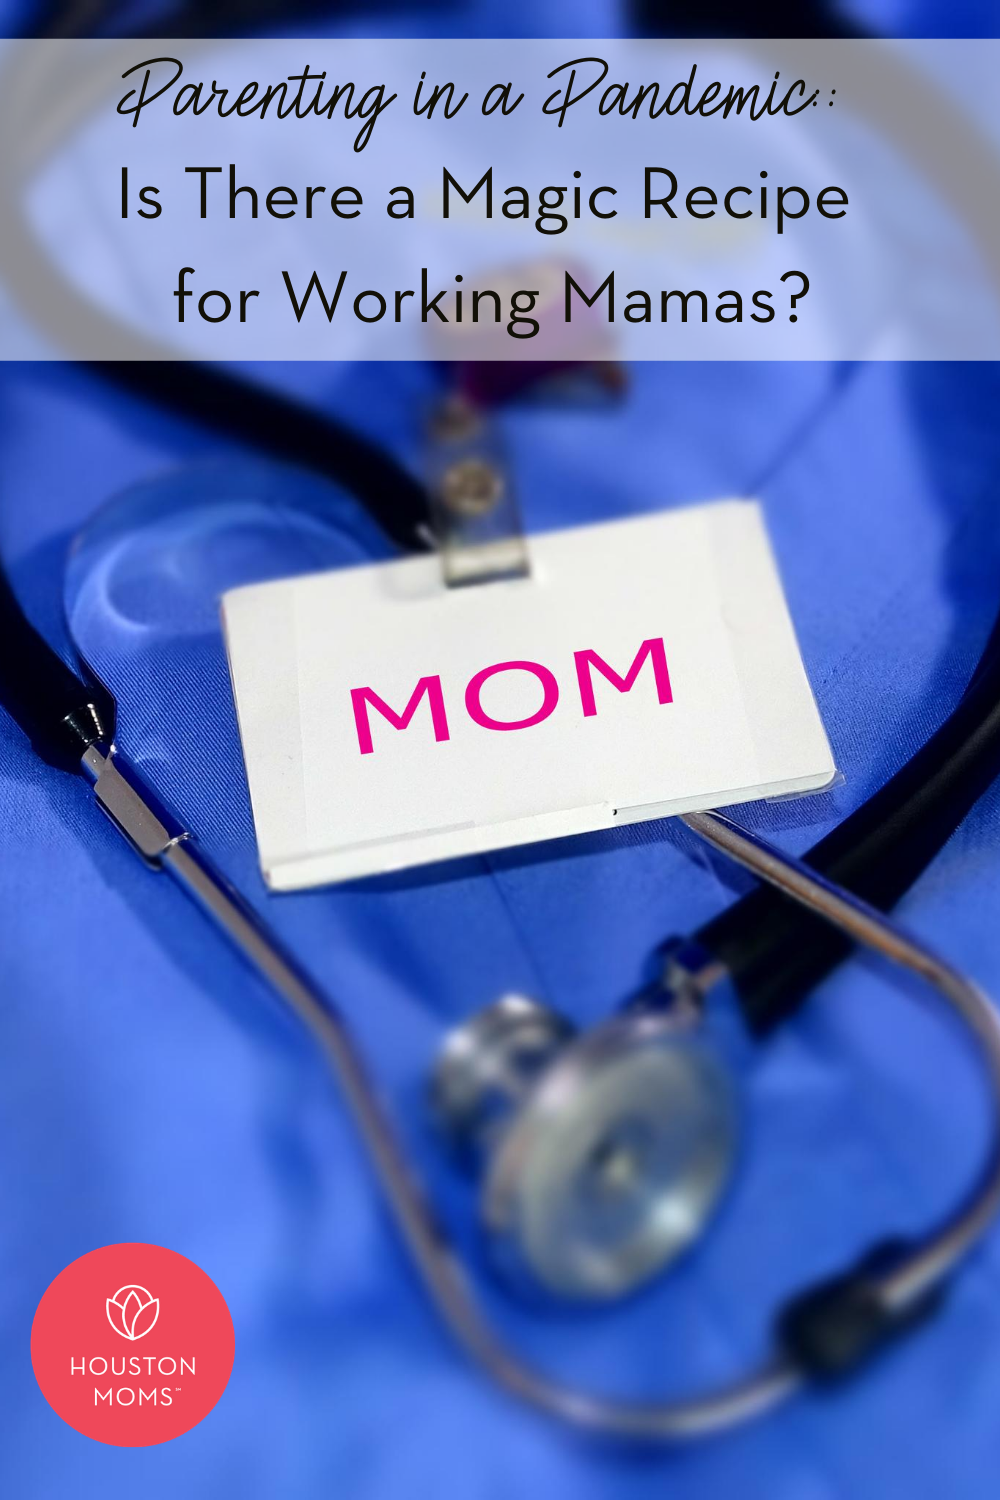 Houston Moms "Parenting in a Pandemic:: Is There a Magic Recipe for Working Mamas?" #houstonmoms #houstonmomsblog #momsaroundhouston